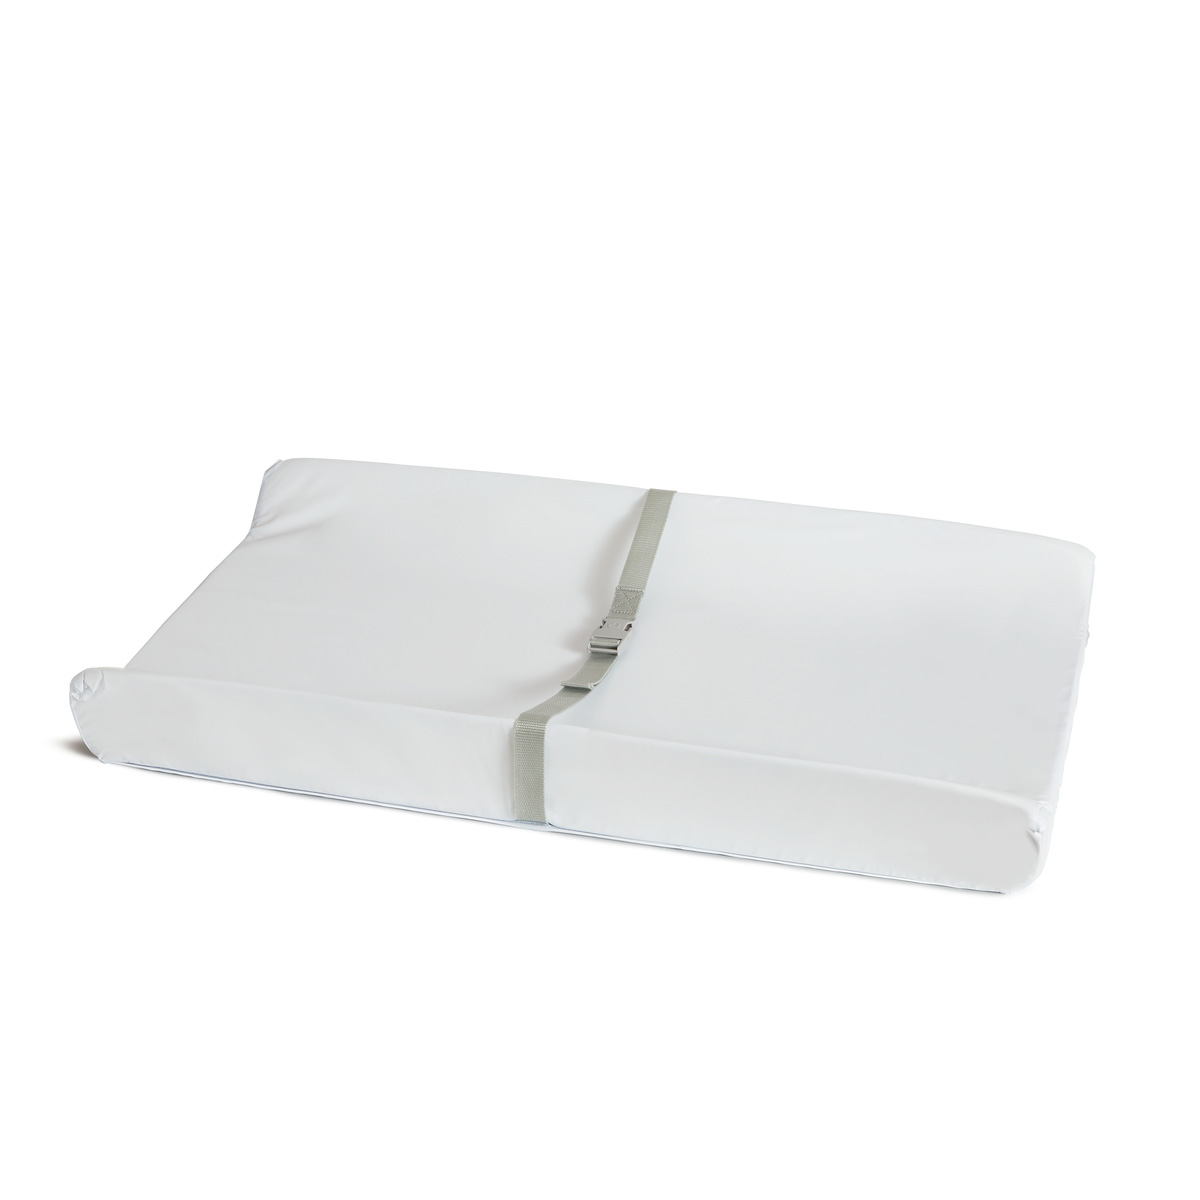 Secure Grip™ Changing Pad